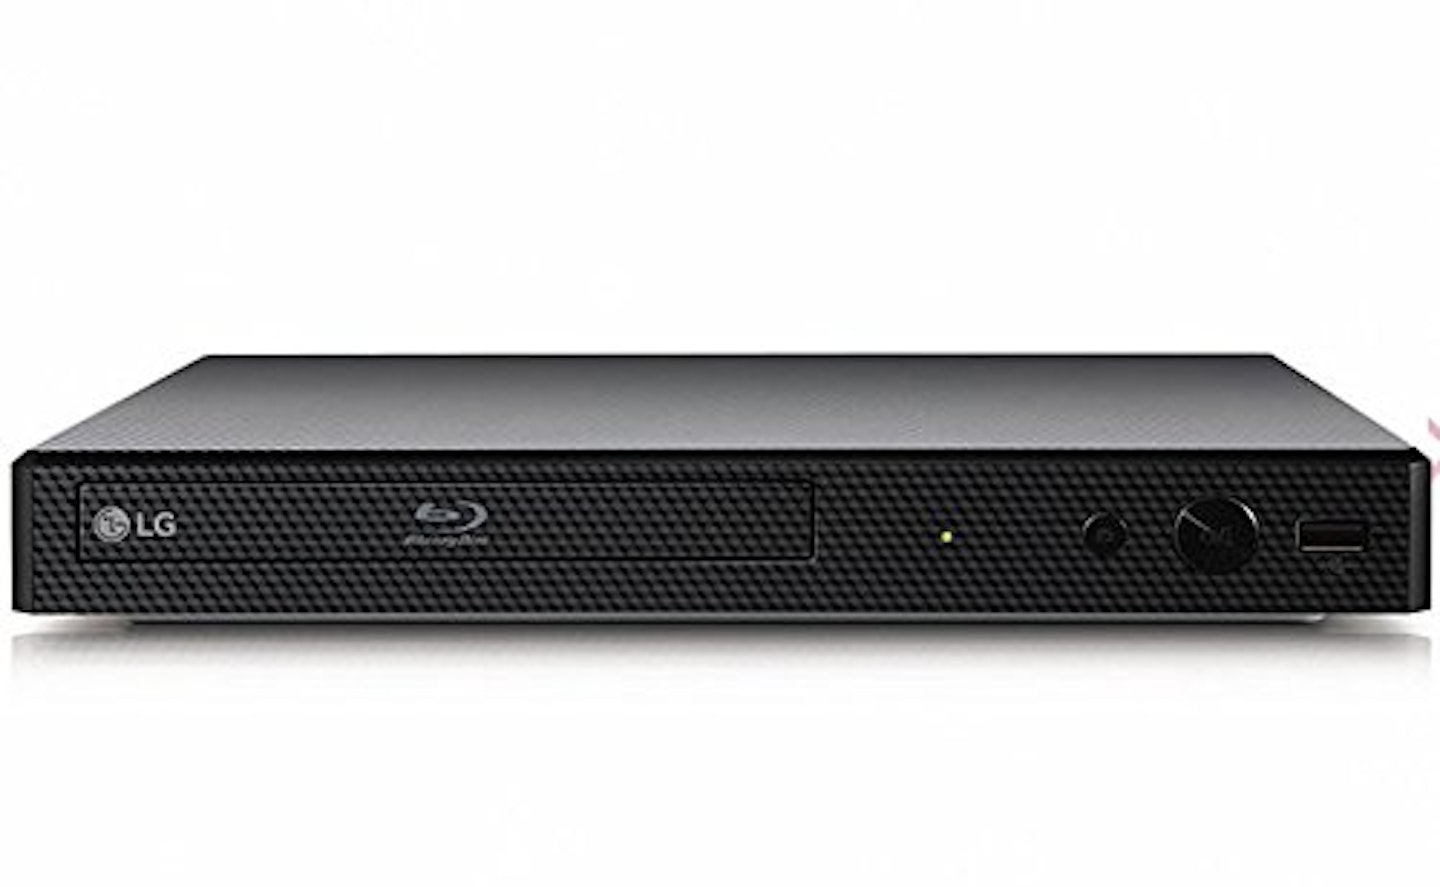 LG BP250 Blu-Ray and DVD Disc Player with Full HD Up-scaling and external HDD playback, £50.45